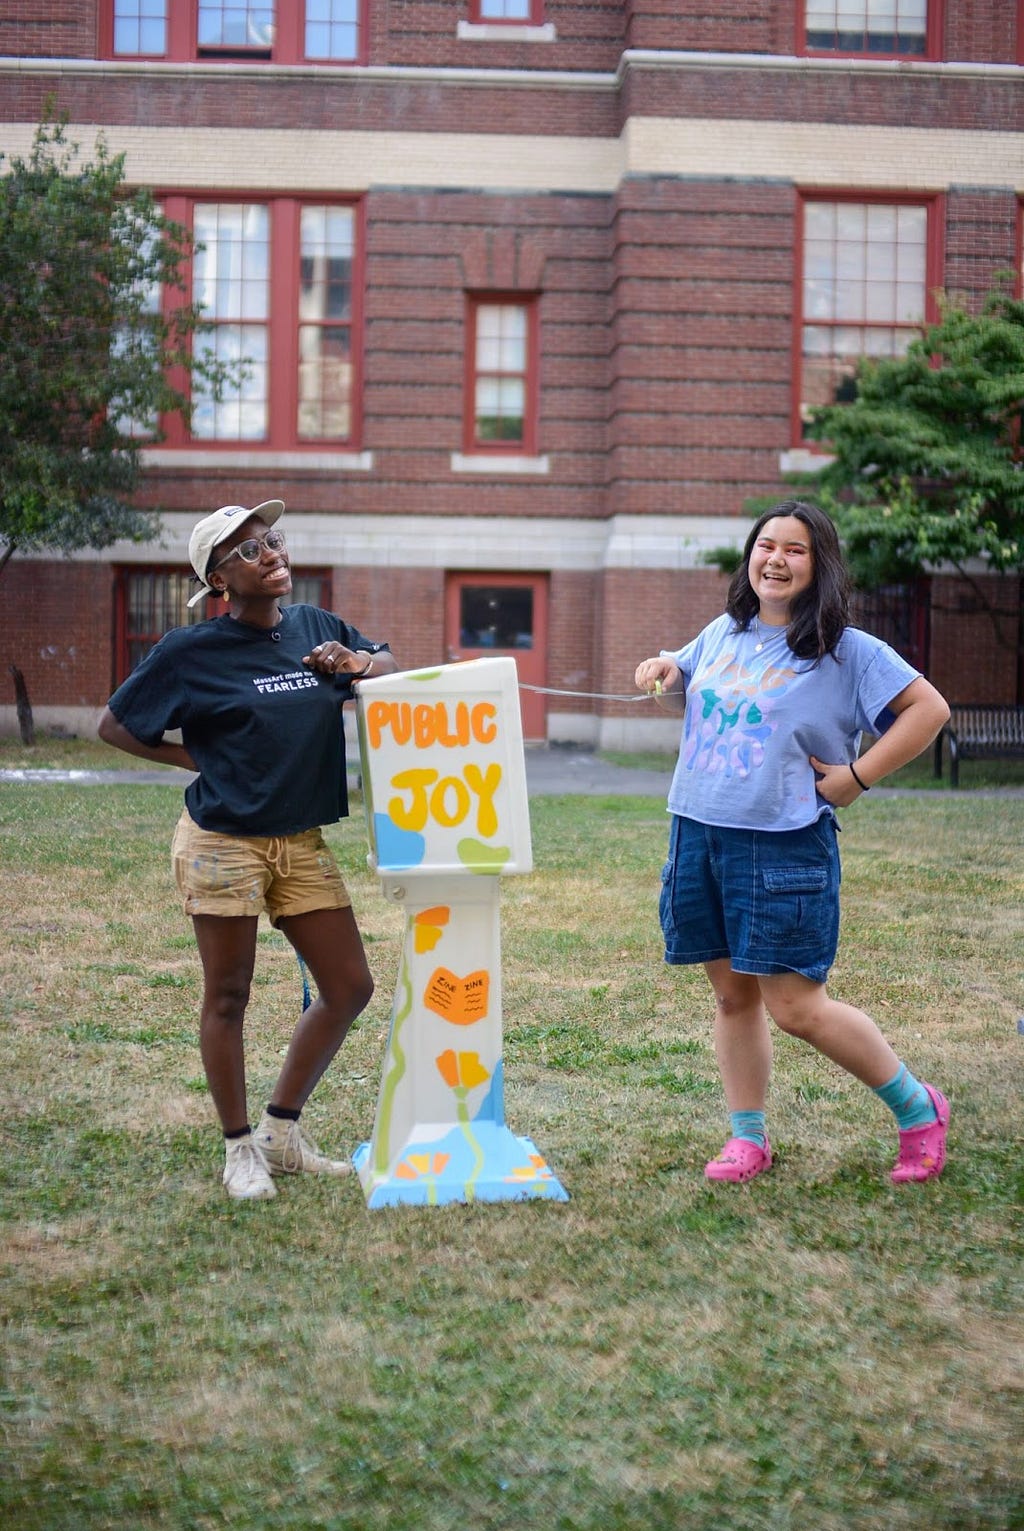 Sabrina and Ava stand with a four-foot-tall box between them on a patch of grass. They are both smiling, and Ava opens the top of the box. The box is painted with bright orange, yellow, green, and blue colors and says the words “Public Joy”.